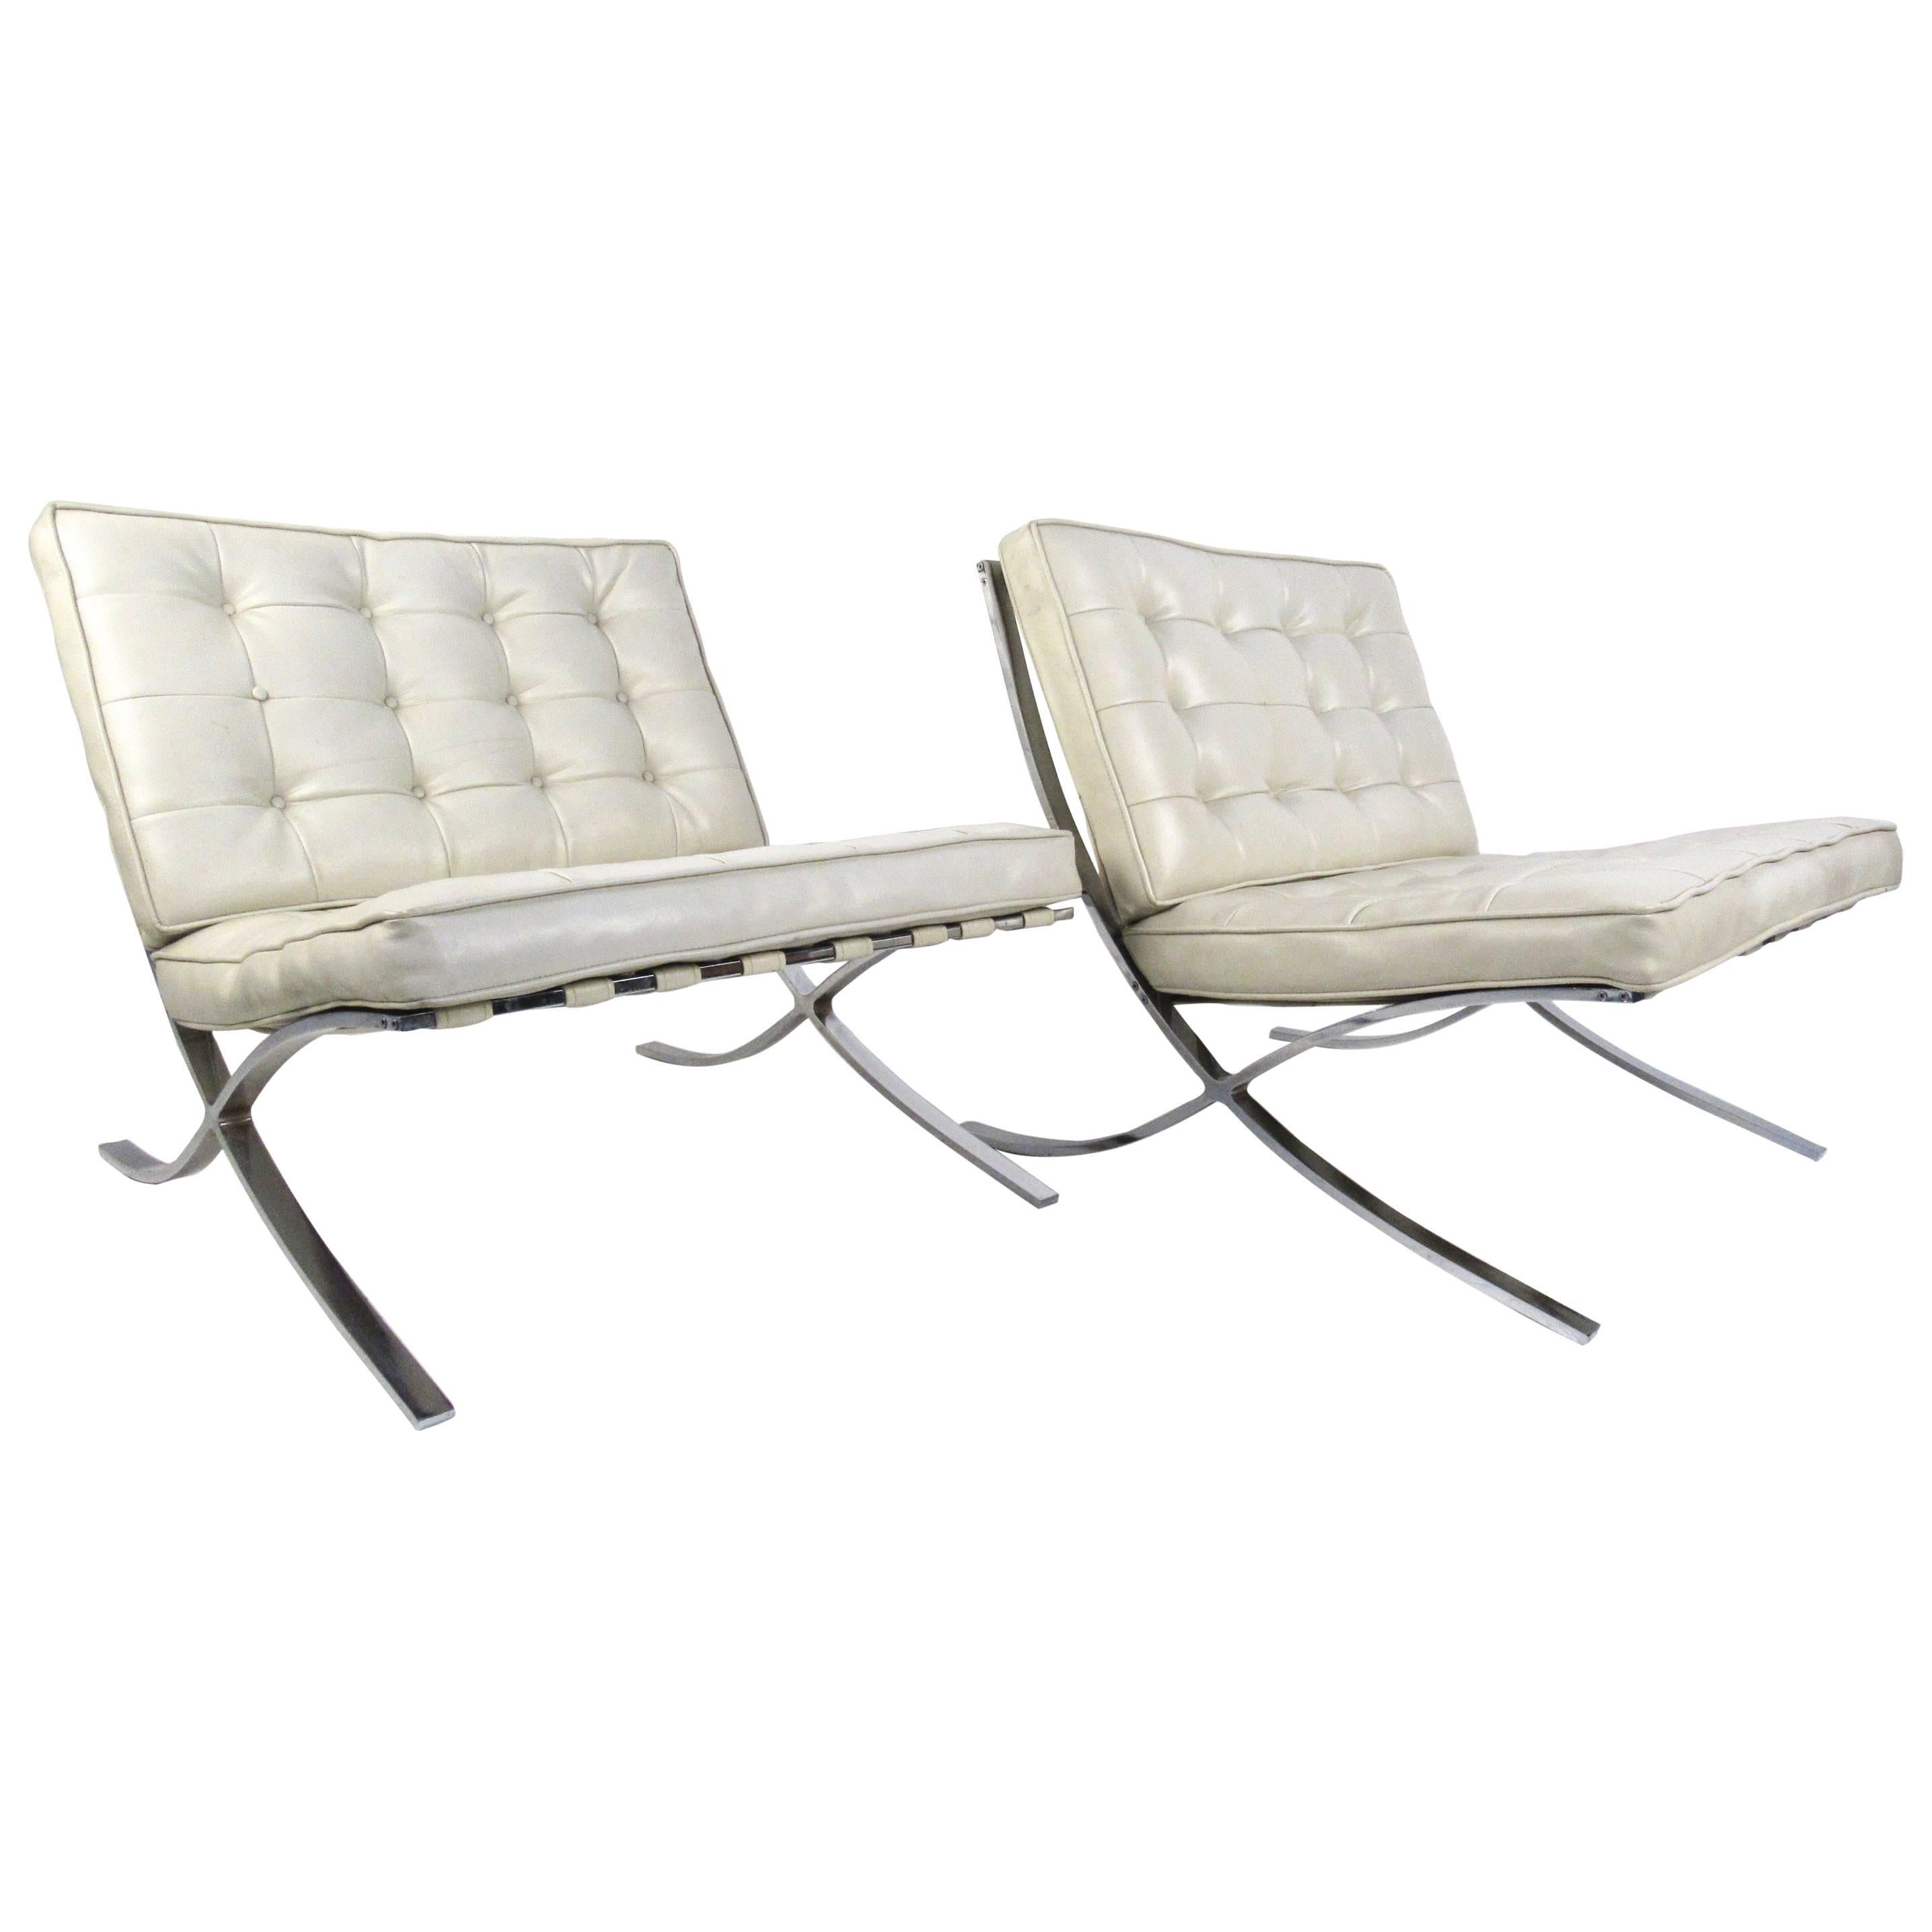 Pair of Mid-Century Modern Barcelona Style Lounge Chairs For Sale